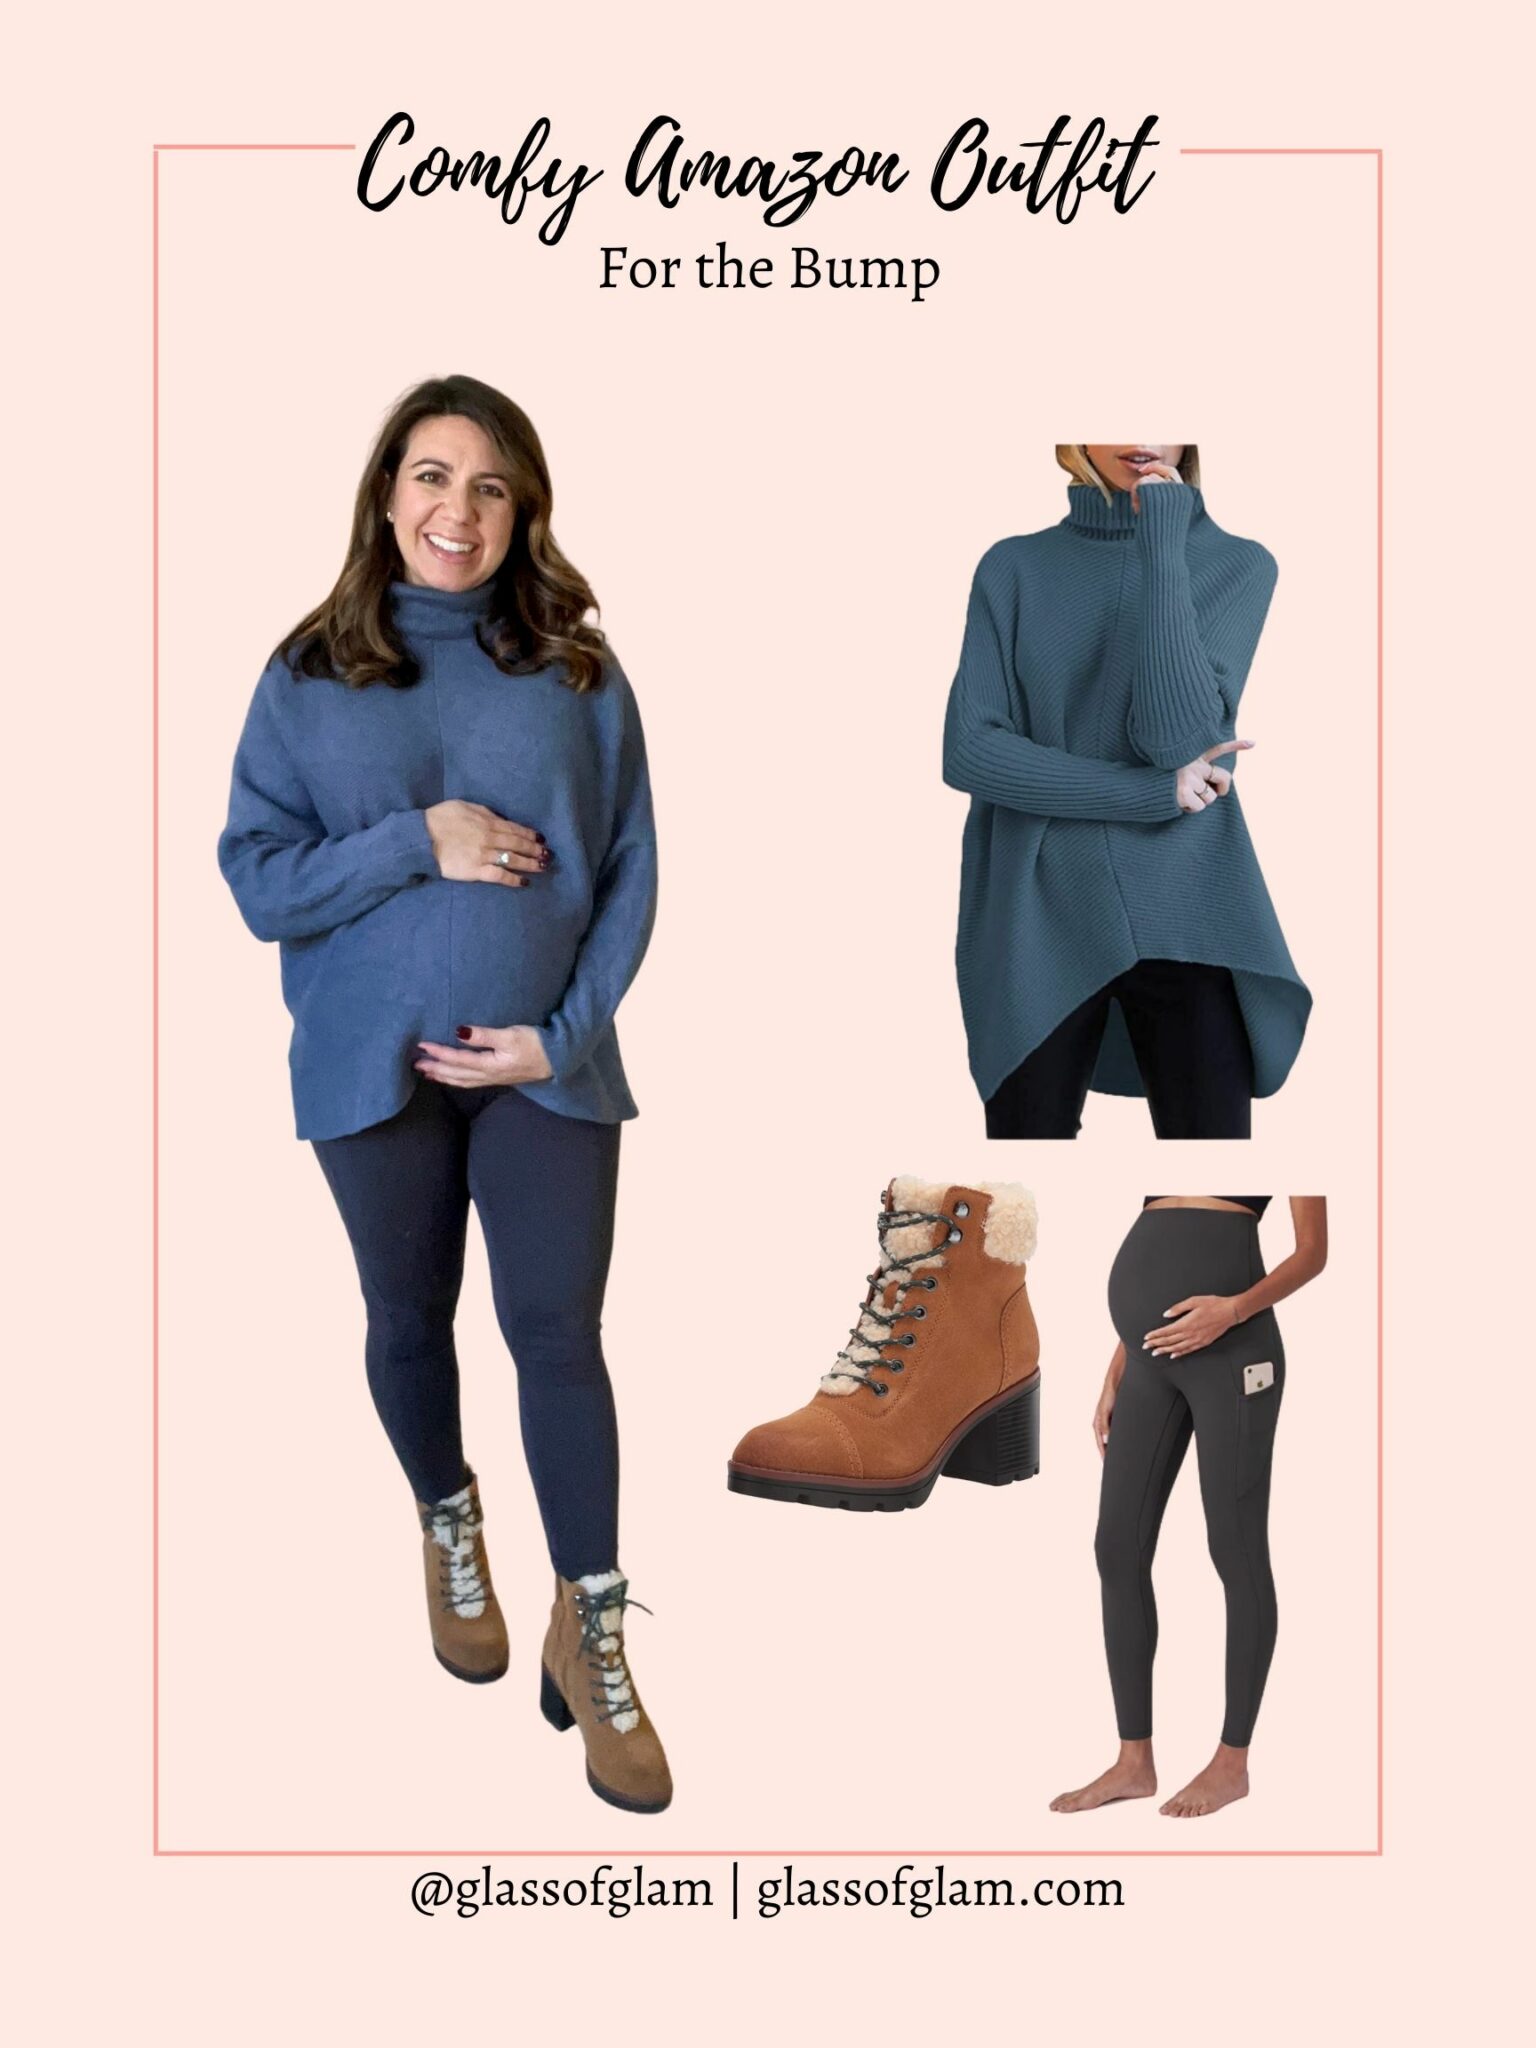 Comfy Maternity Outfit available at Amazon by top Chicago fashion blogger, Glass of Glam